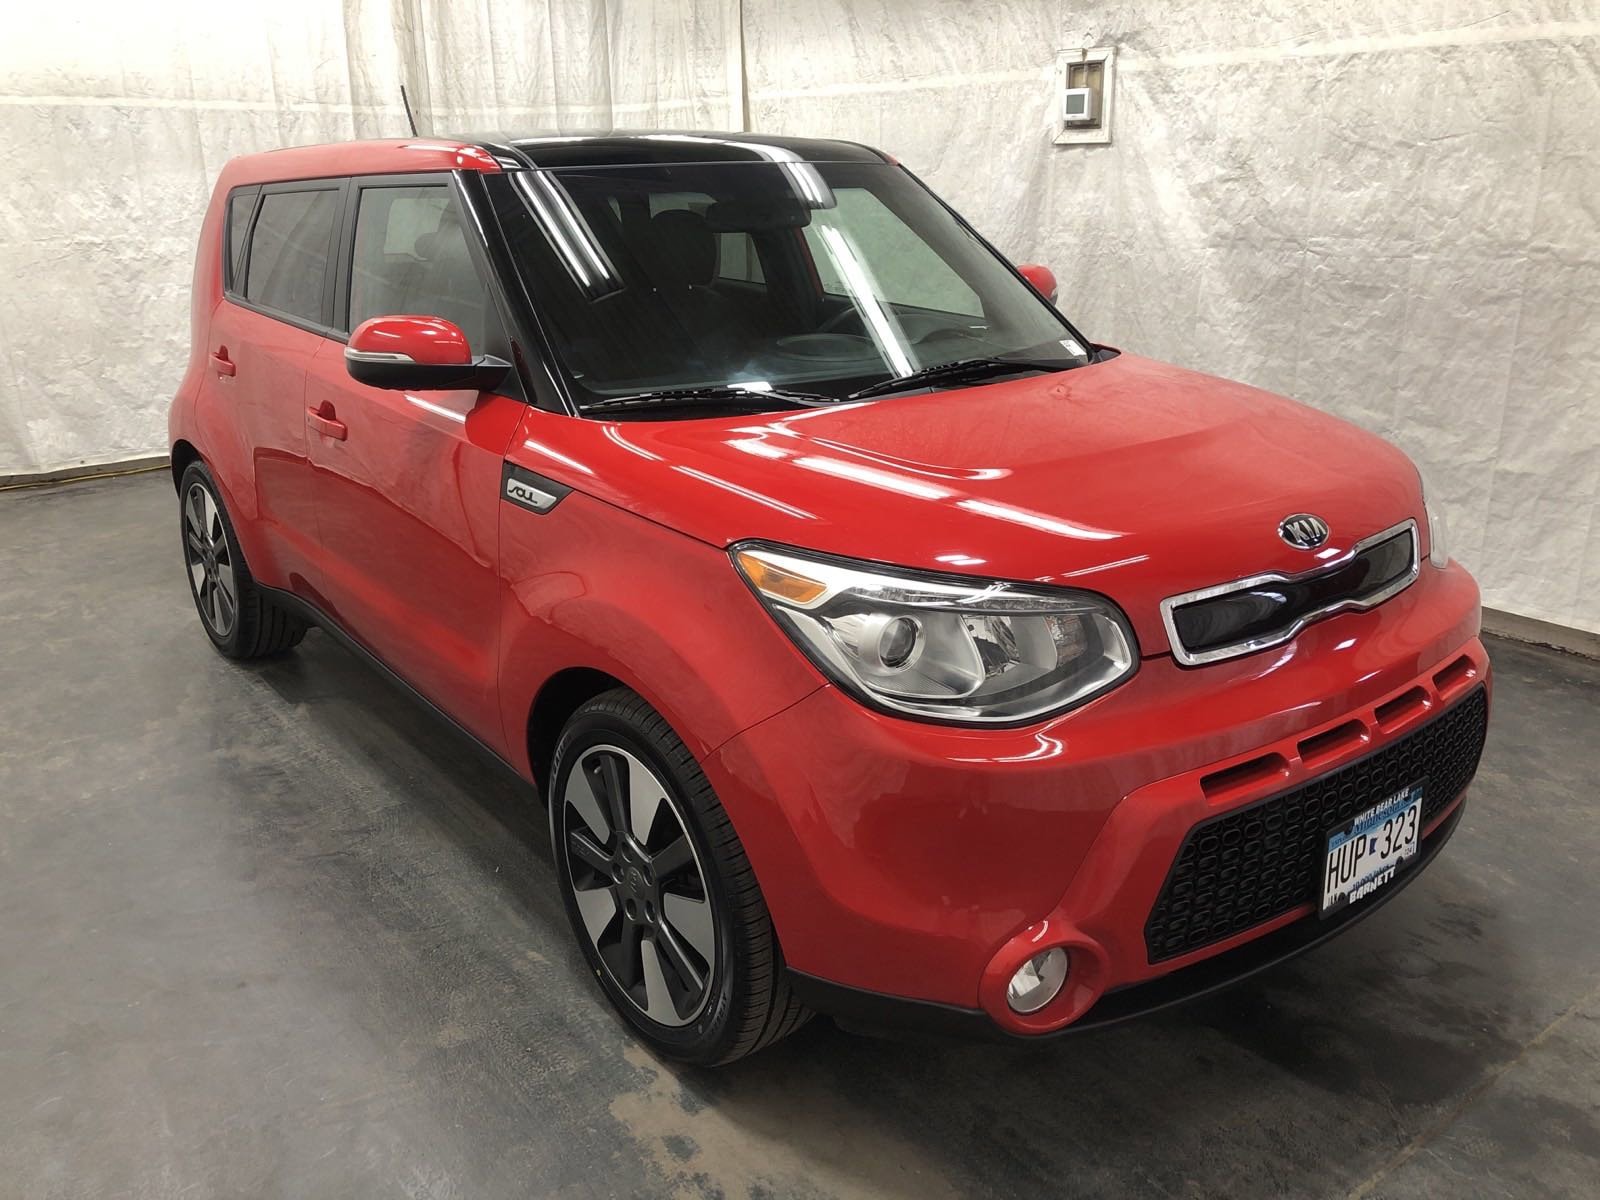 Used 2015 Kia Soul Exclaim with VIN KNDJX3A53F7762296 for sale in White Bear Lake, Minnesota